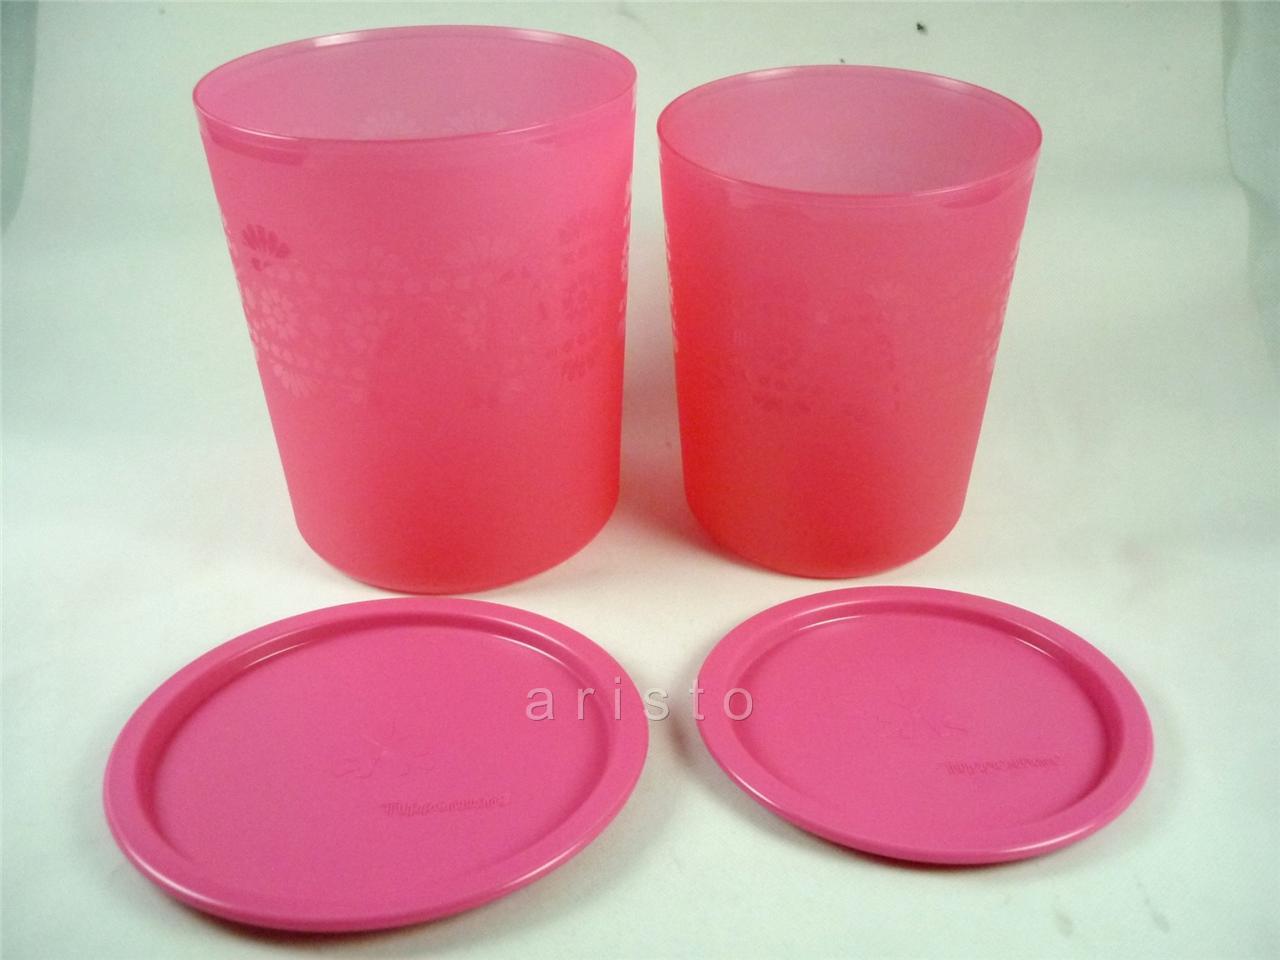 New Tupperware Pink Mosaic Canister Set 1.9L & 2.8L Limited Release .am